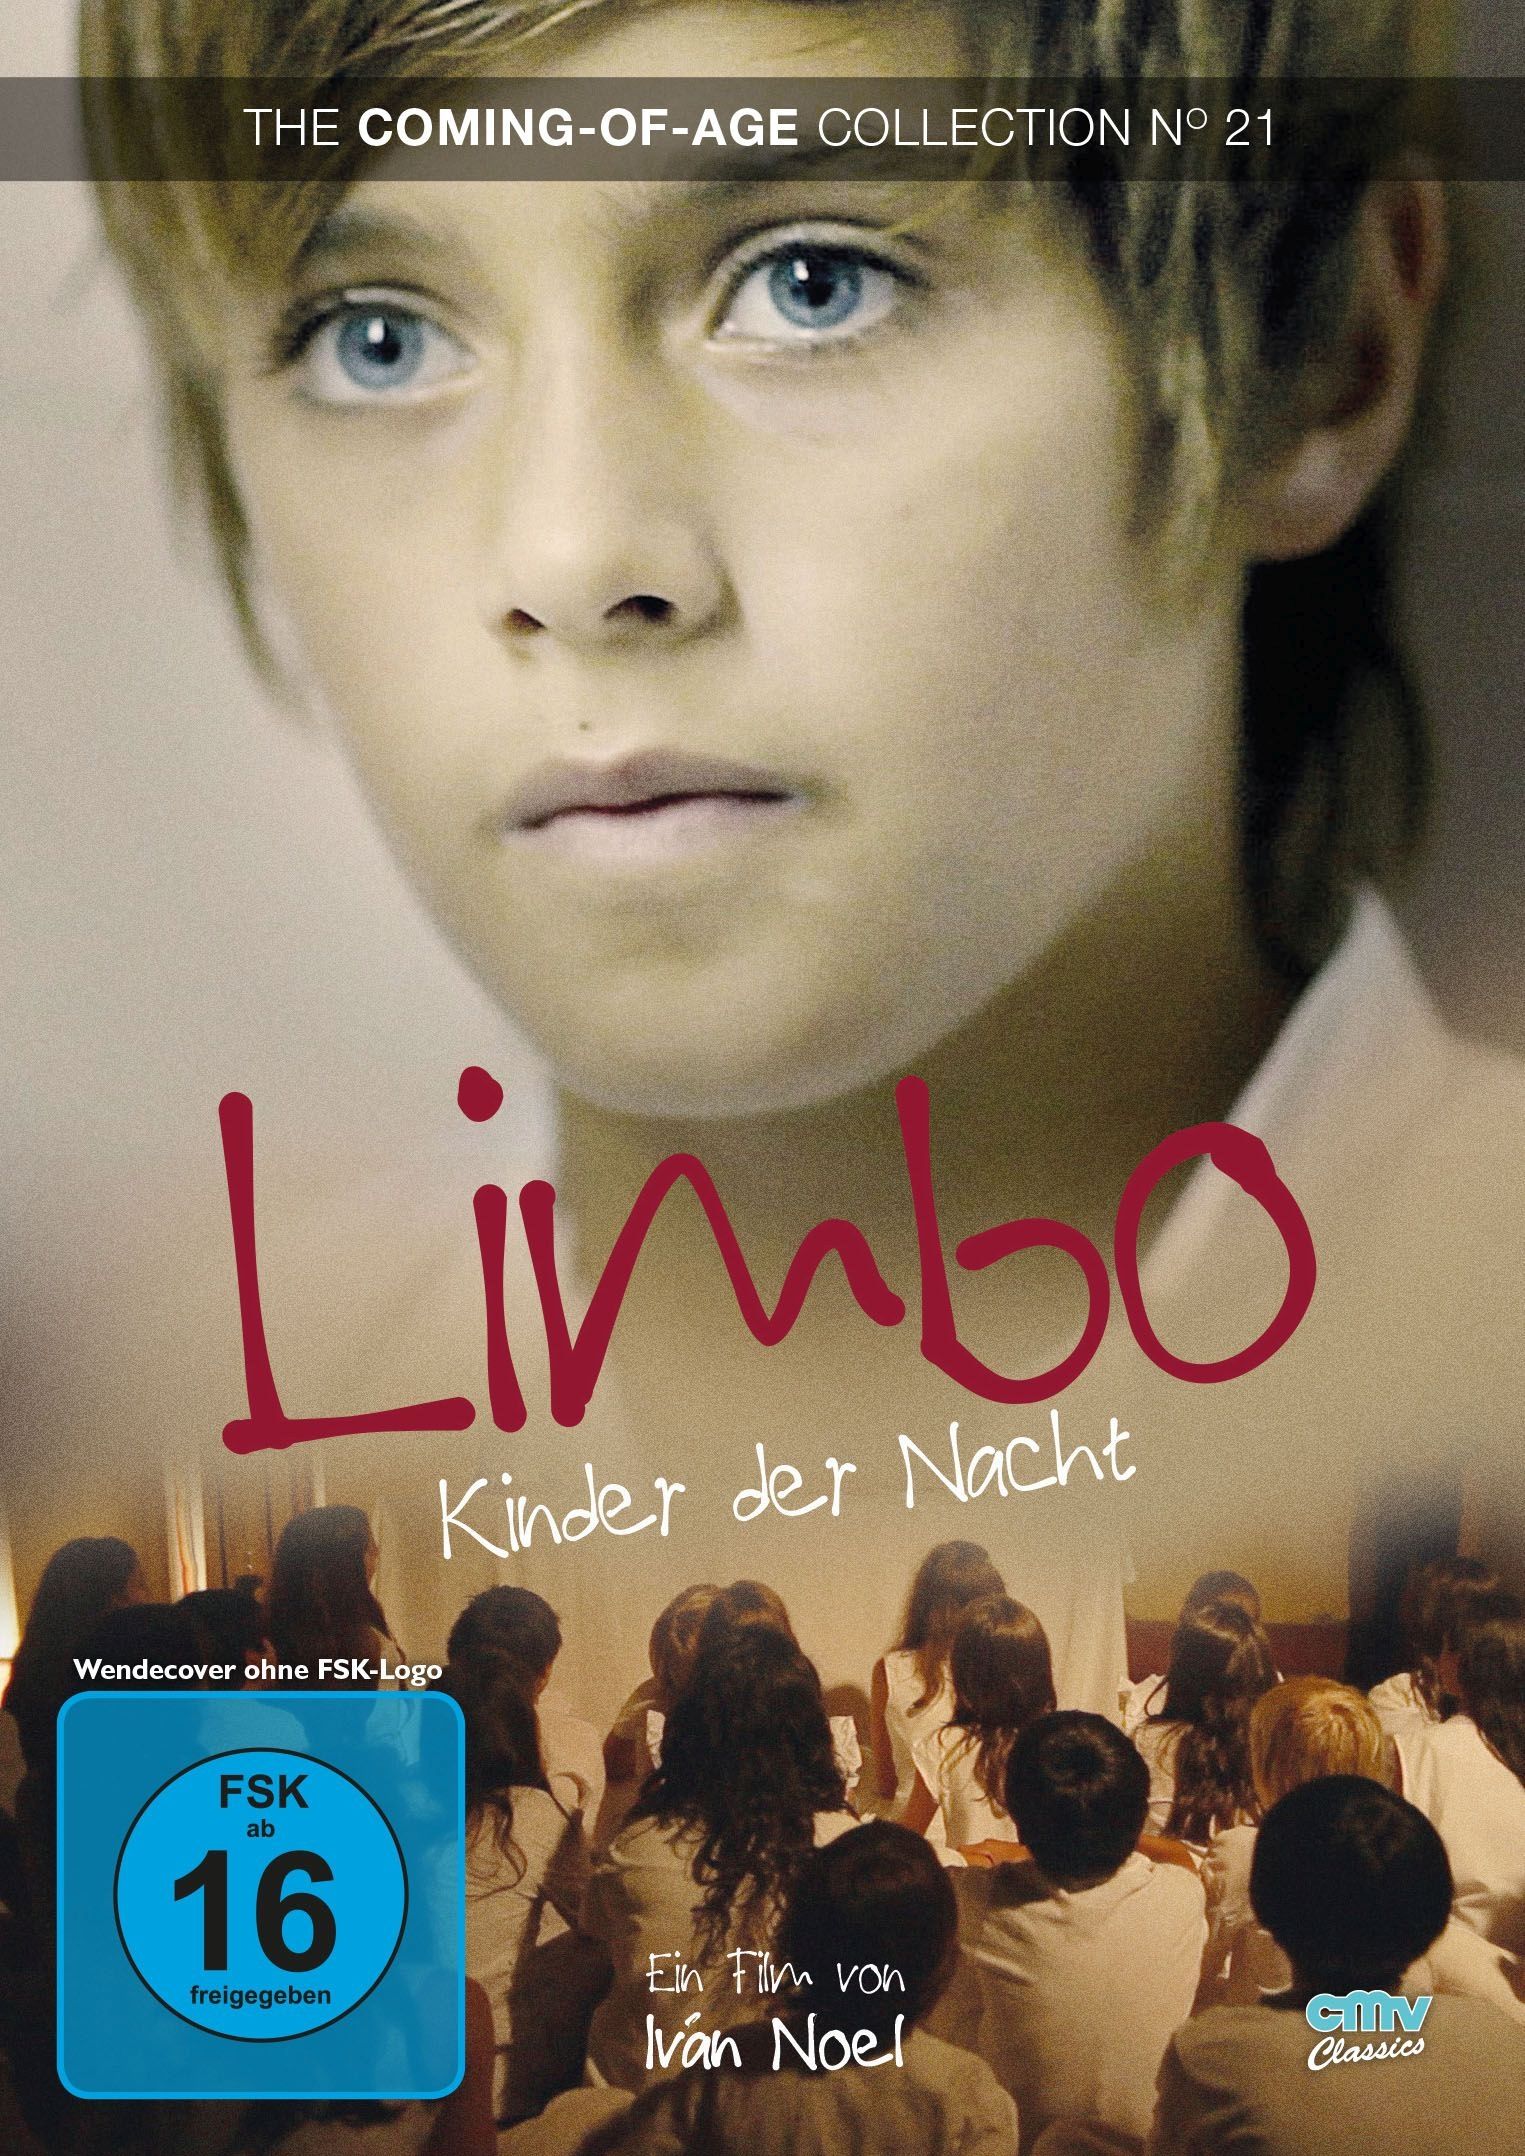 Limbo - Children of the Night (OmU) (The Coming-of-Age Collection #21)